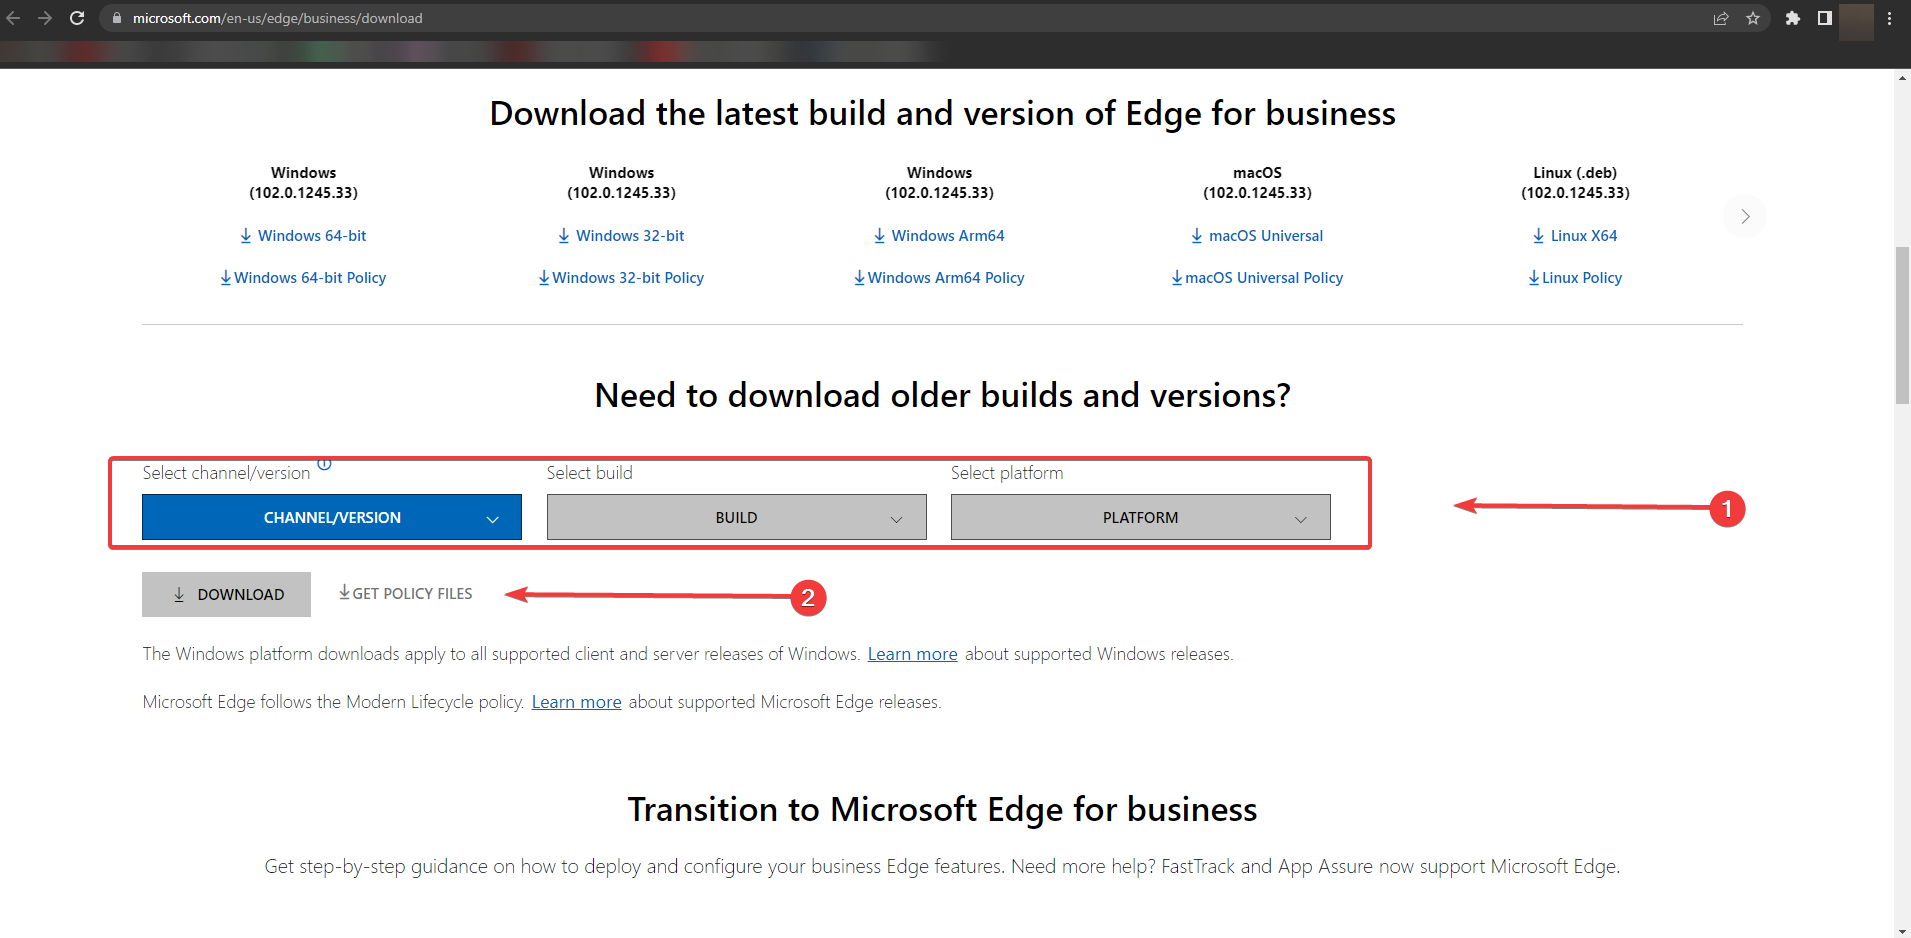 selecting build version and getting policy files for edge